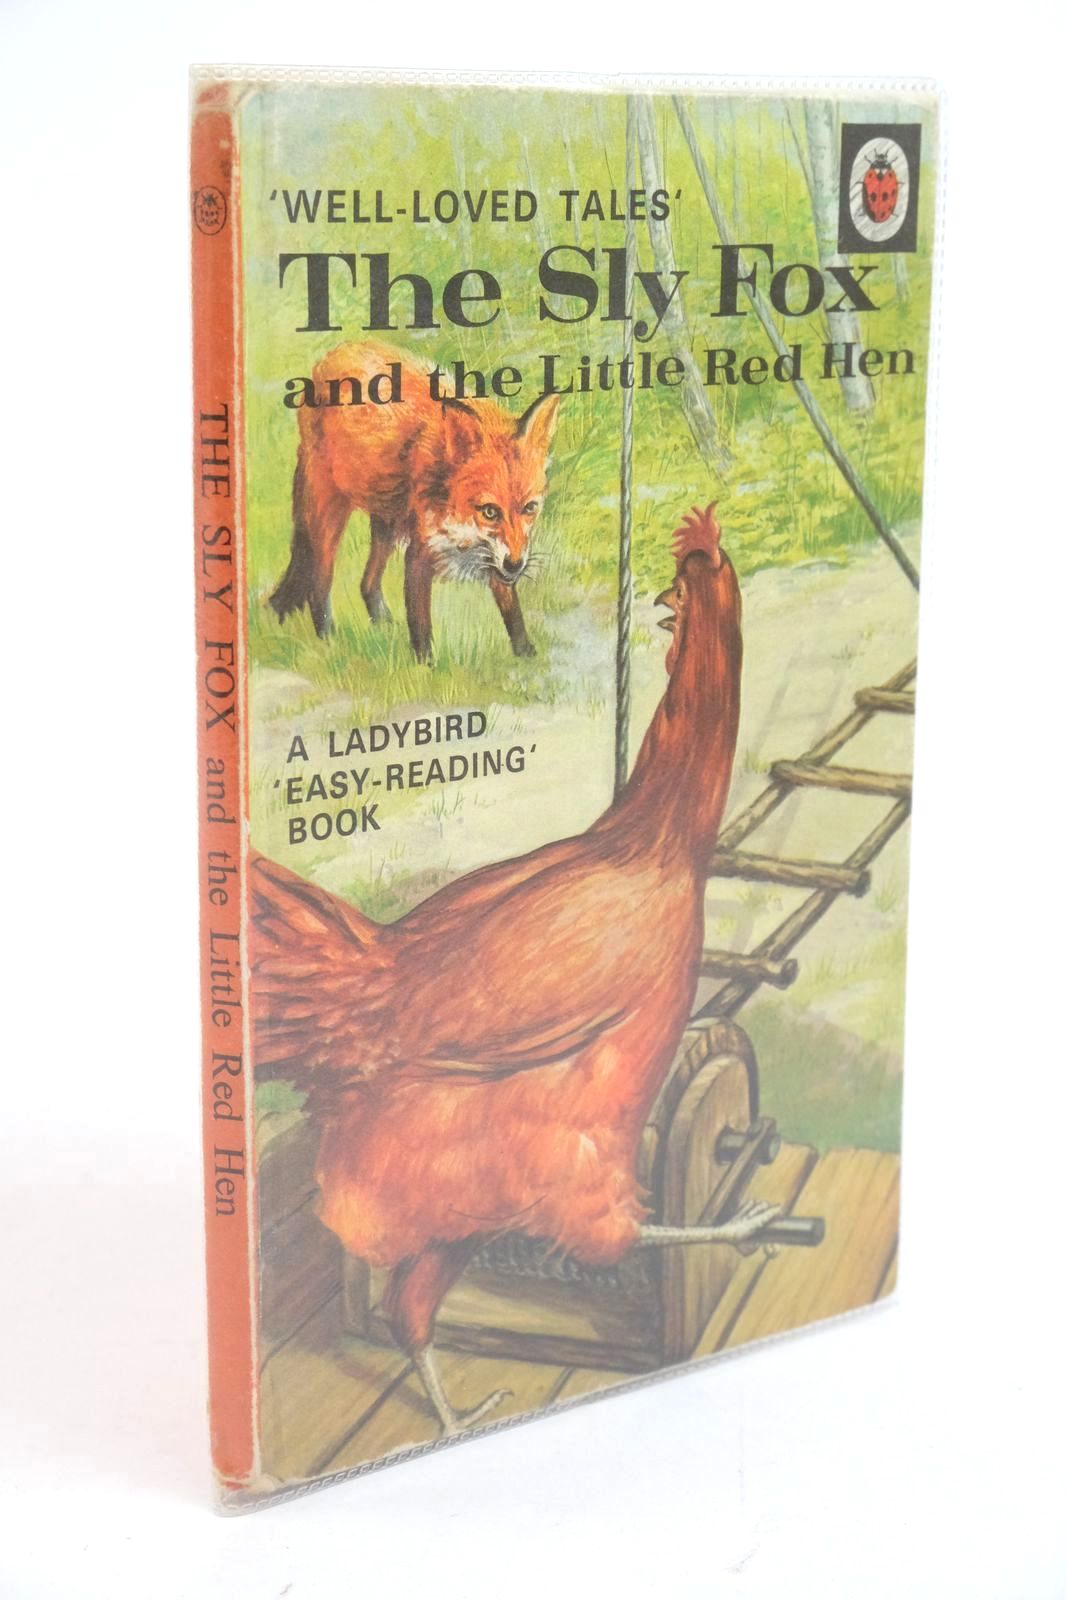 Photo of THE SLY FOX AND THE LITTLE RED HEN written by Southgate, Vera illustrated by Lumley, Robert published by Wills &amp; Hepworth Ltd. (STOCK CODE: 1322381)  for sale by Stella & Rose's Books